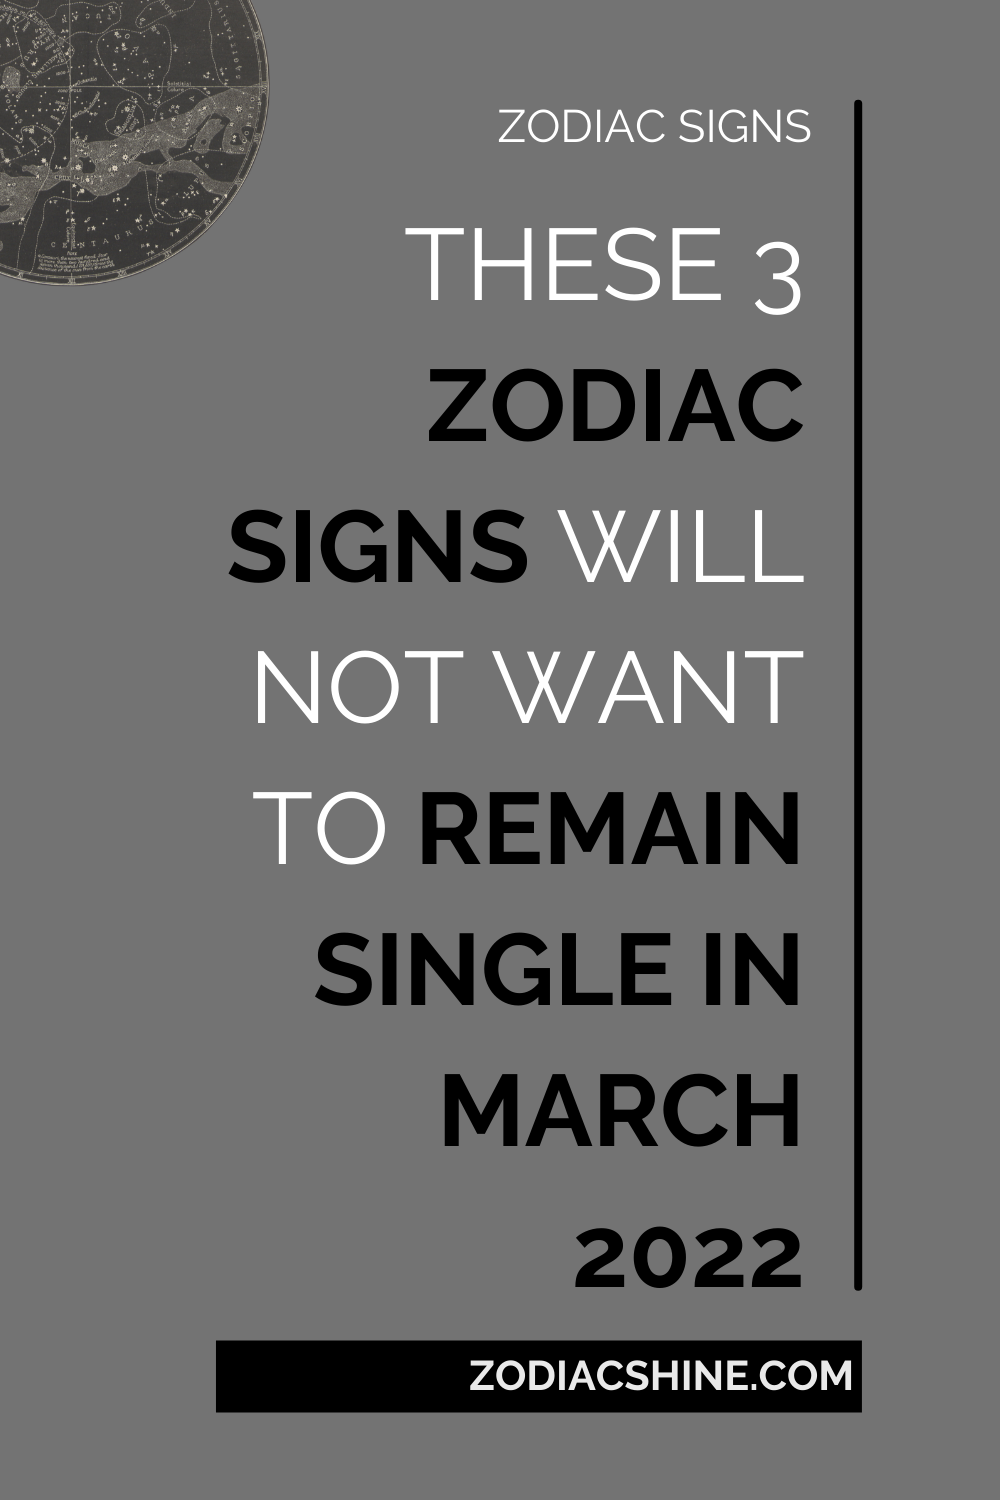 These 3 Zodiac Signs Will Not Want To Remain Single In March 2022